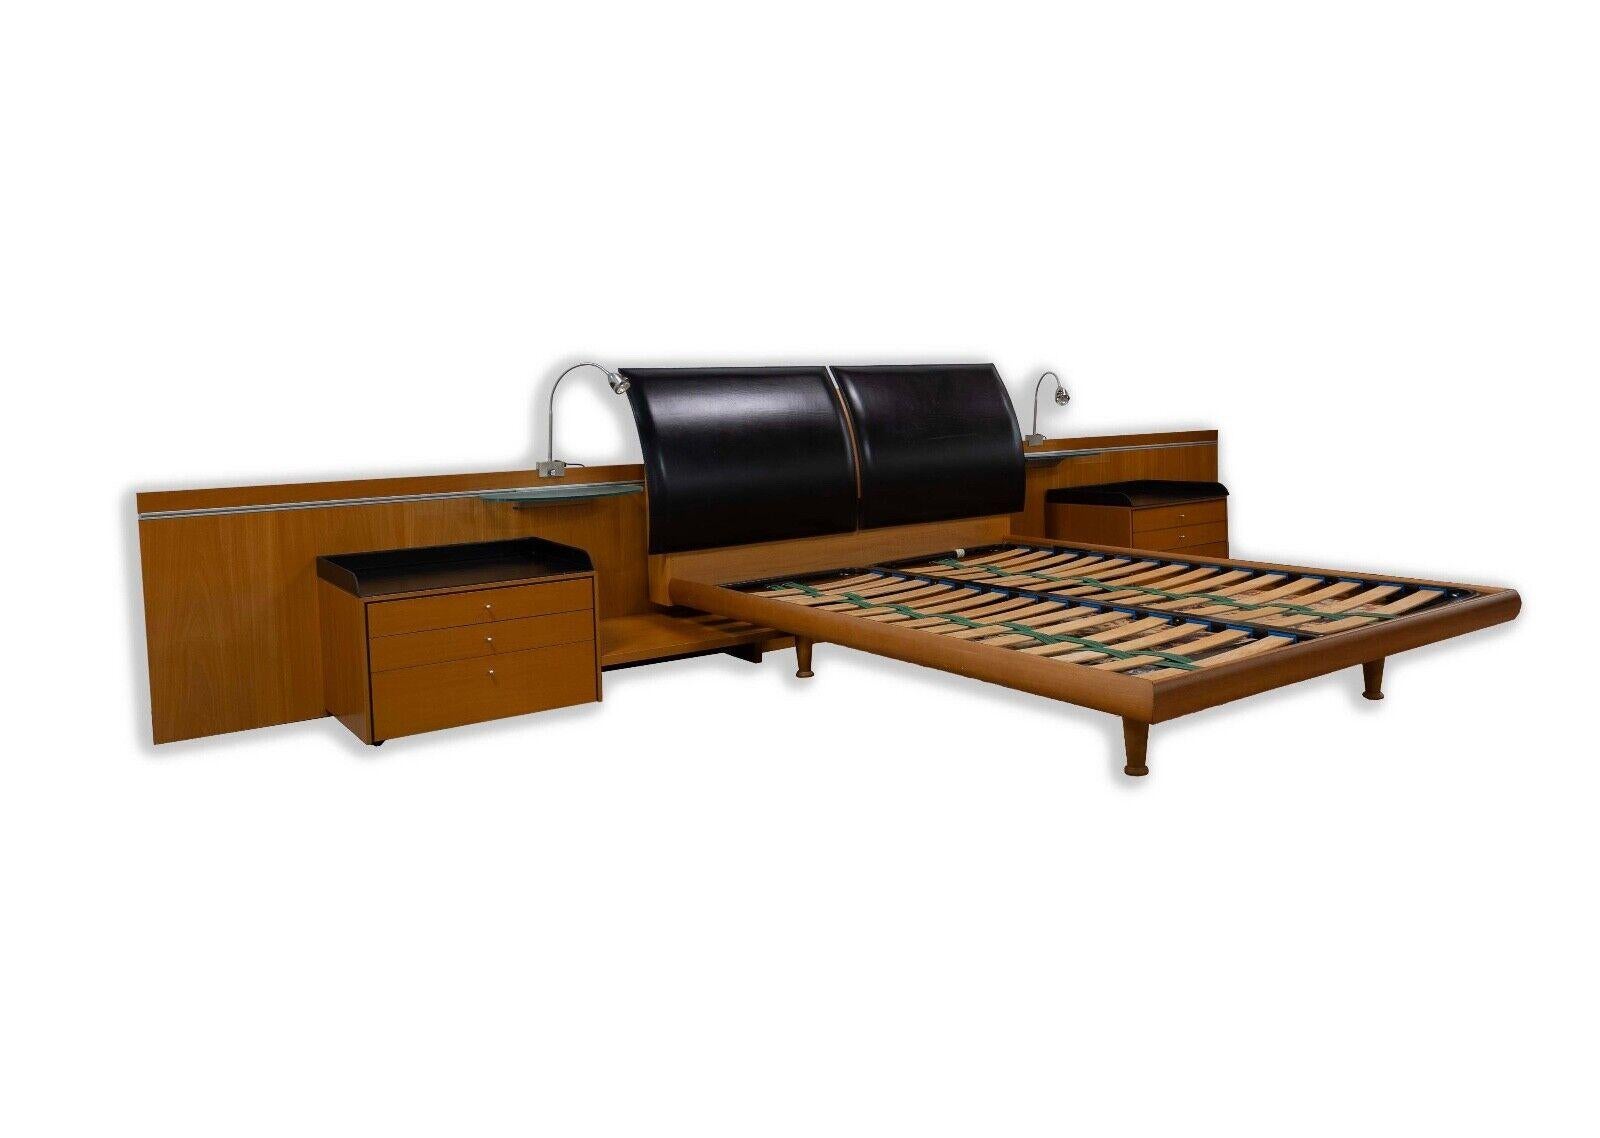 Experience the epitome of mid-century modern charm with this Danish-inspired Queen Sized Platform Bed, complete with attached side tables and lamps. Crafted with attention to detail, the bed seamlessly integrates minimalist design and functionality,